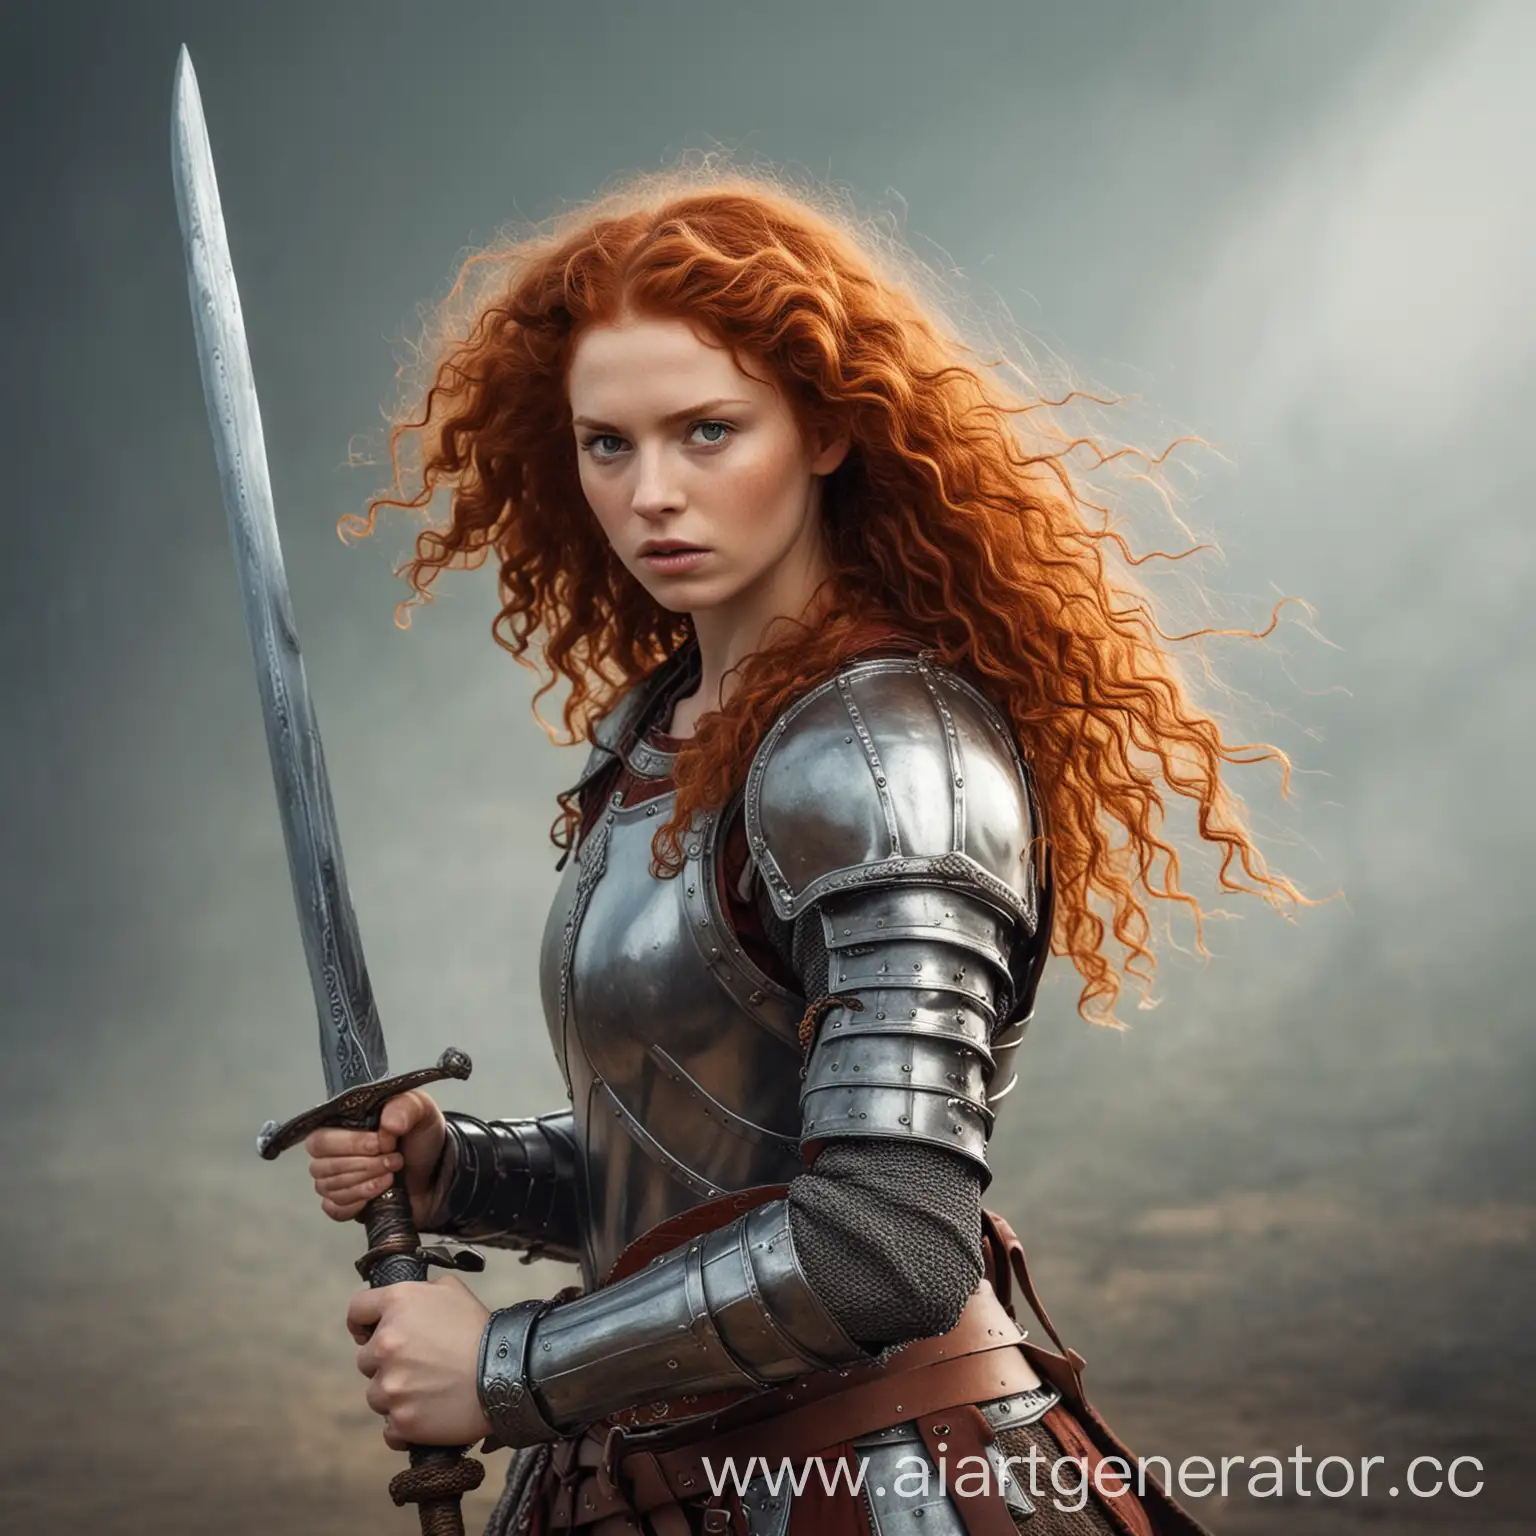 12th century. A curly-haired red-haired woman in armor raised her sword